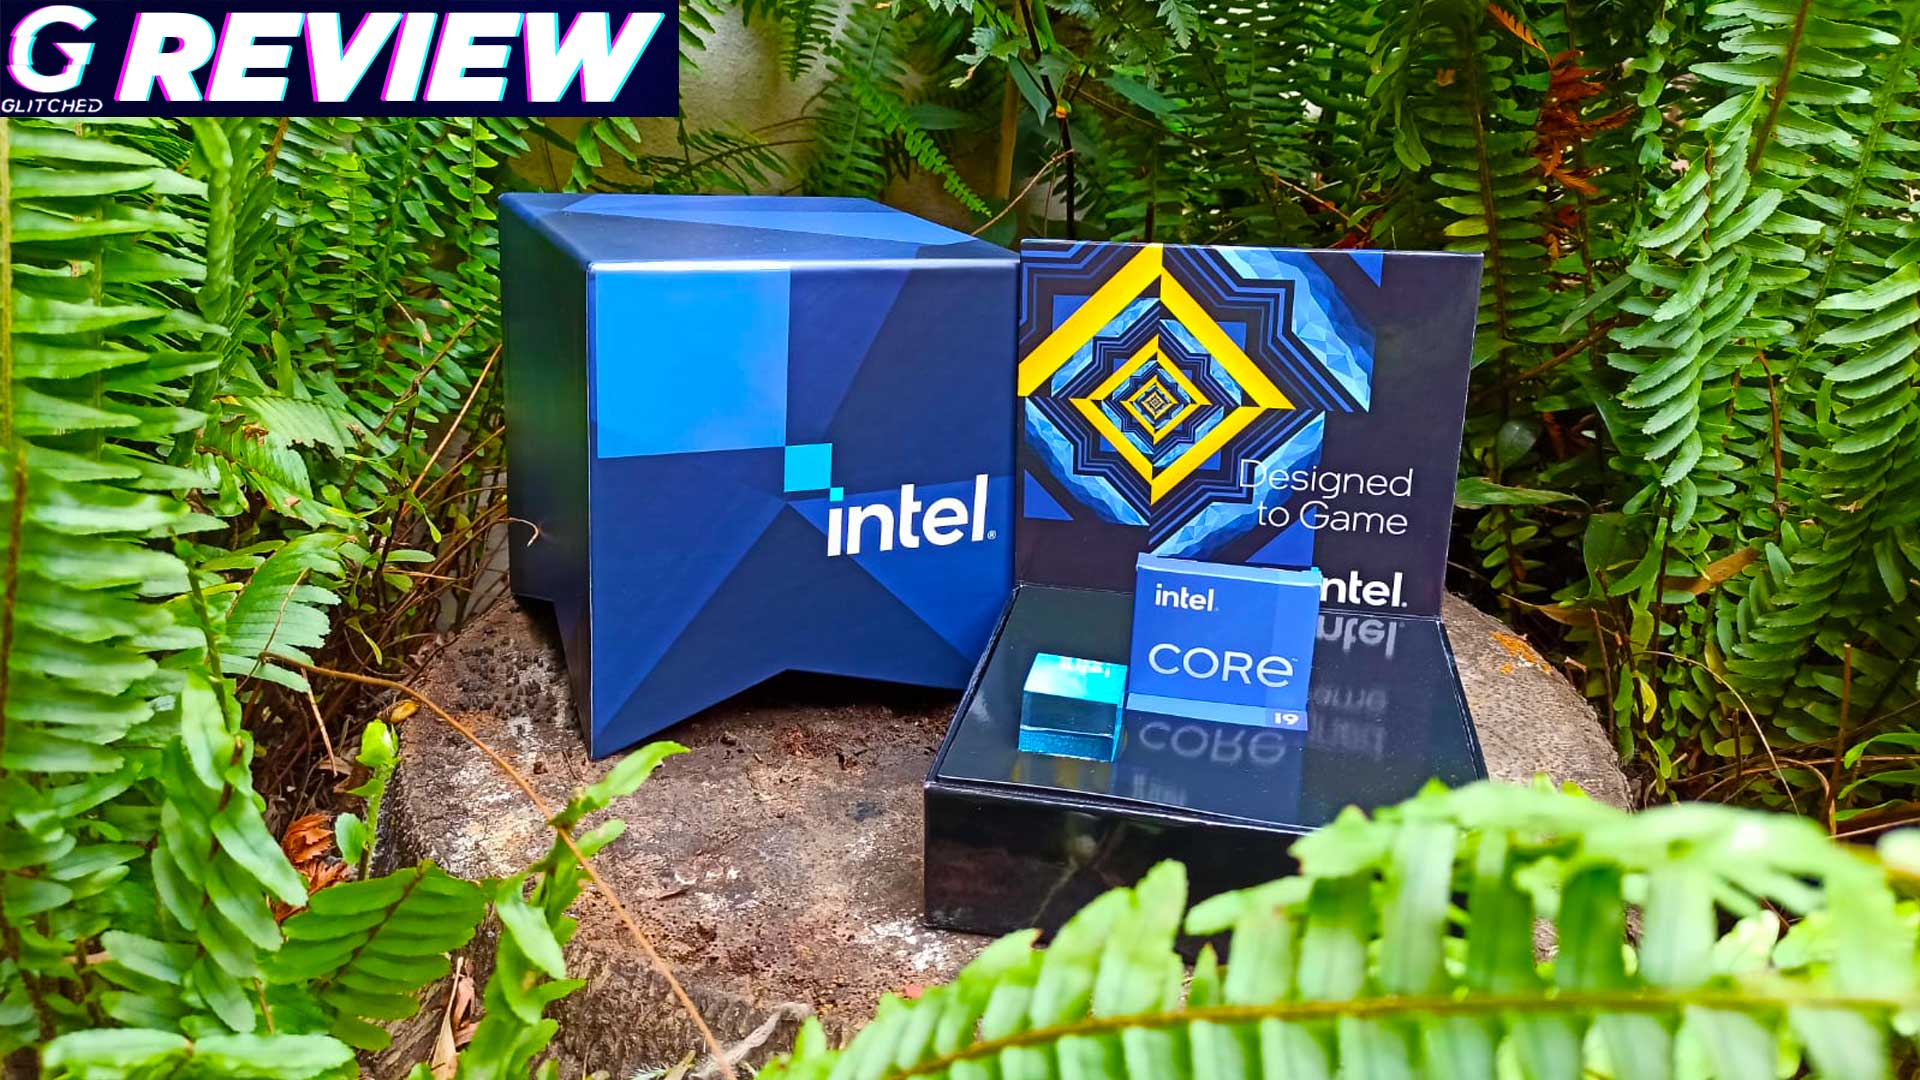 Intel Core i9 11900K Review and Benchmarks – The Best 8-Core Processor Money Can Buy